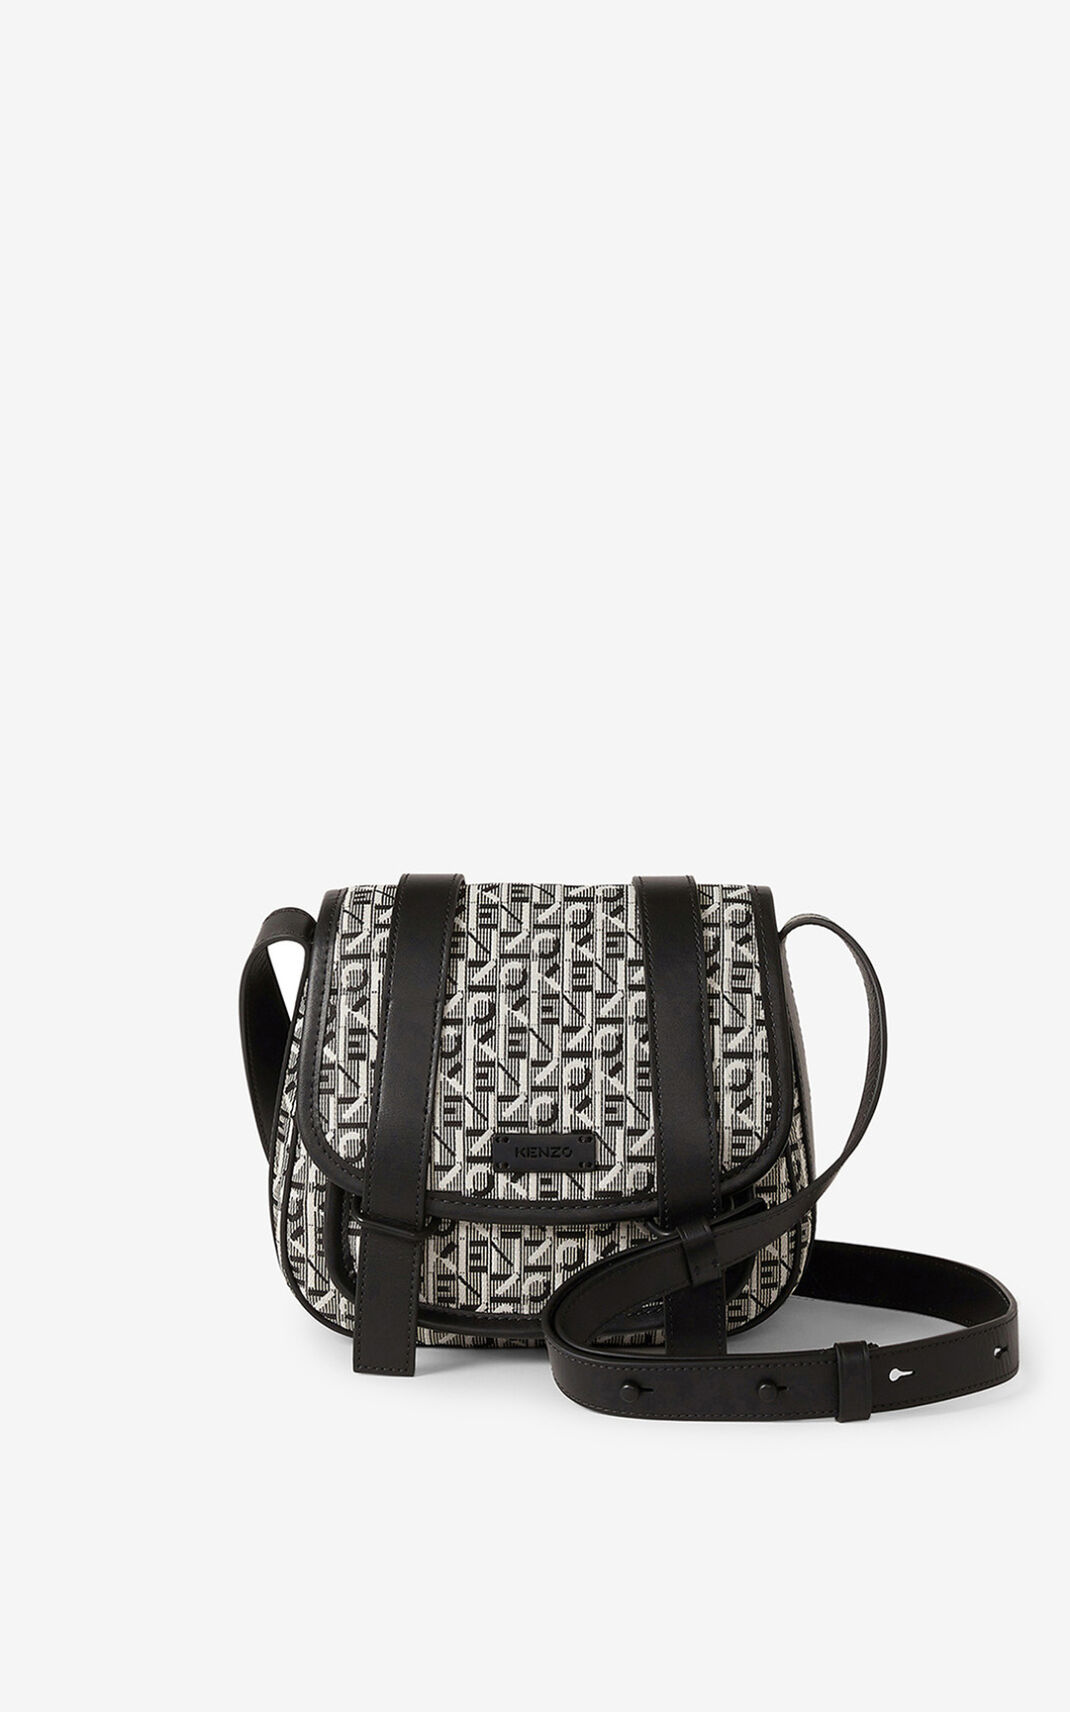 Kenzo Courier small jacquard メッセンジャーバッグ レディース グレー - ZSTRQE287